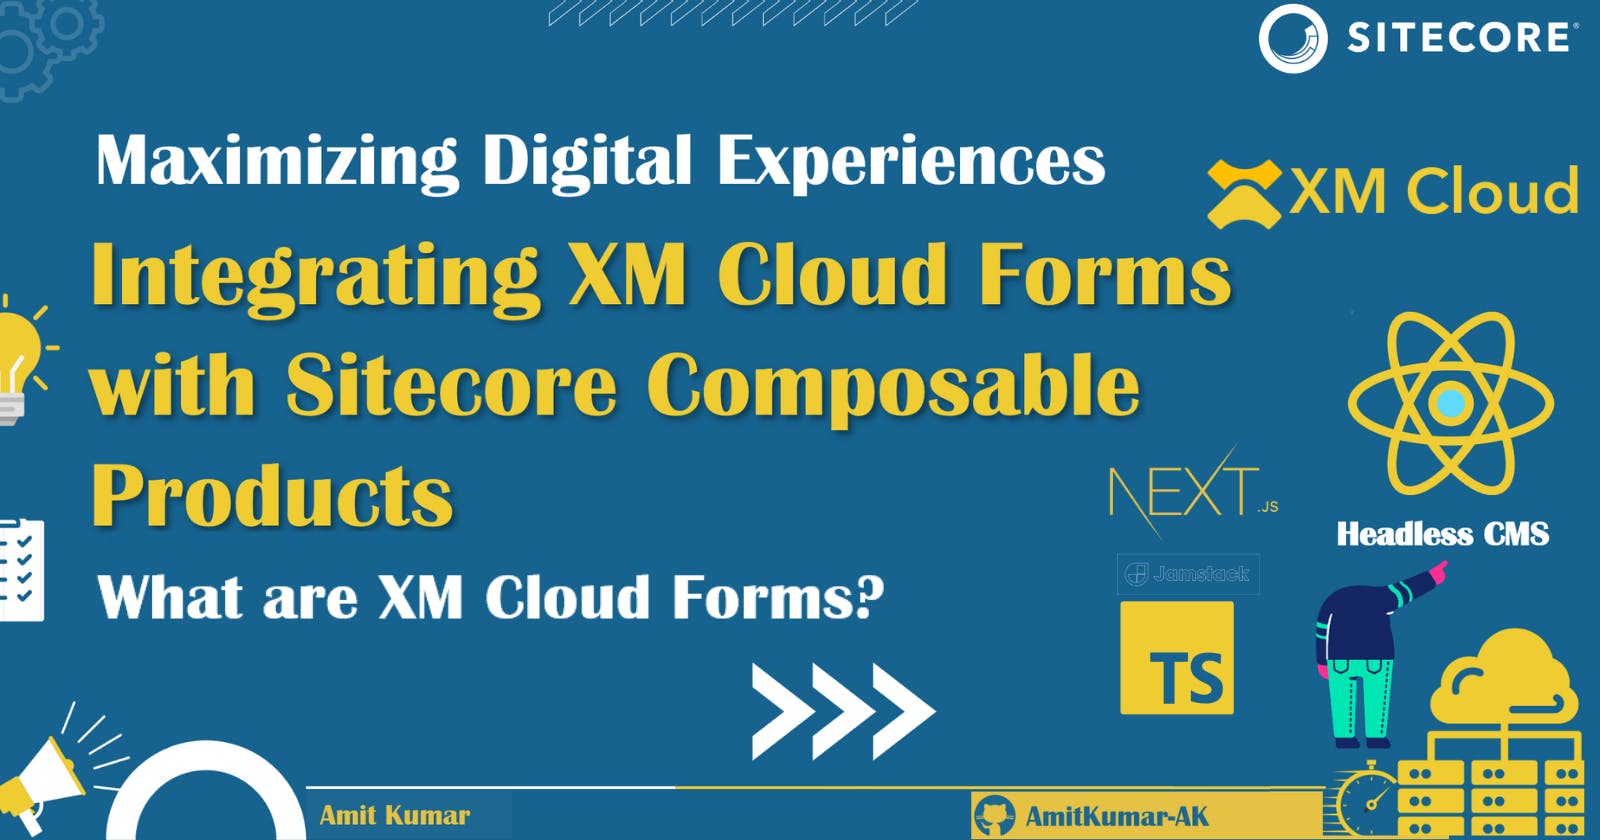 Maximizing Digital Experiences: Integrating XM Cloud Forms with Sitecore Composable Products